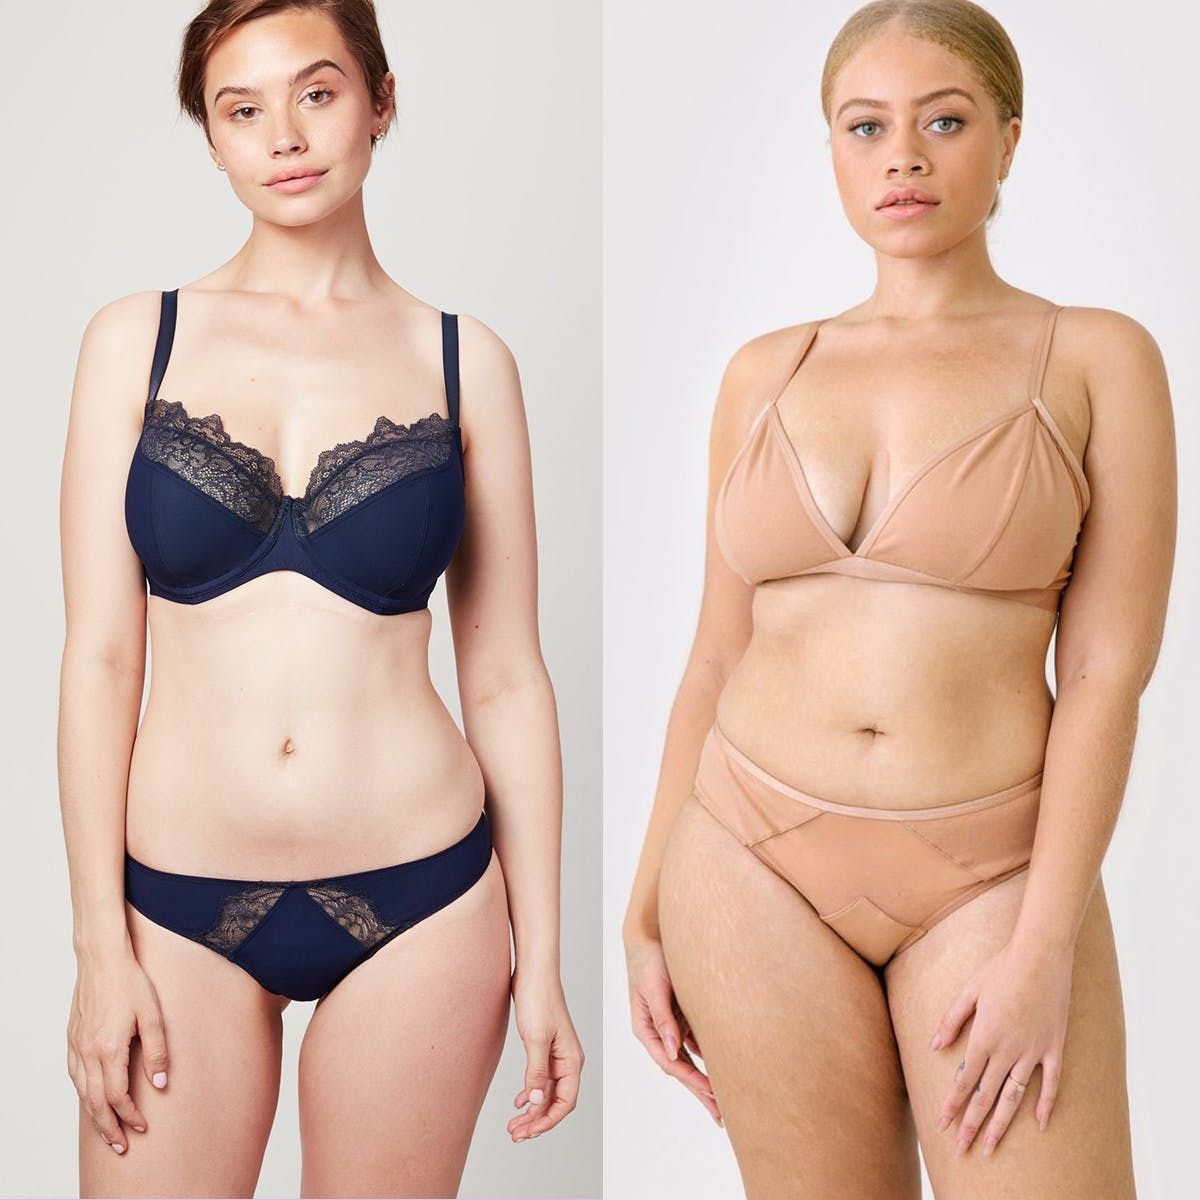 22 Size-Inclusive Lingerie Brands to Shop When You're Feeling Sexy